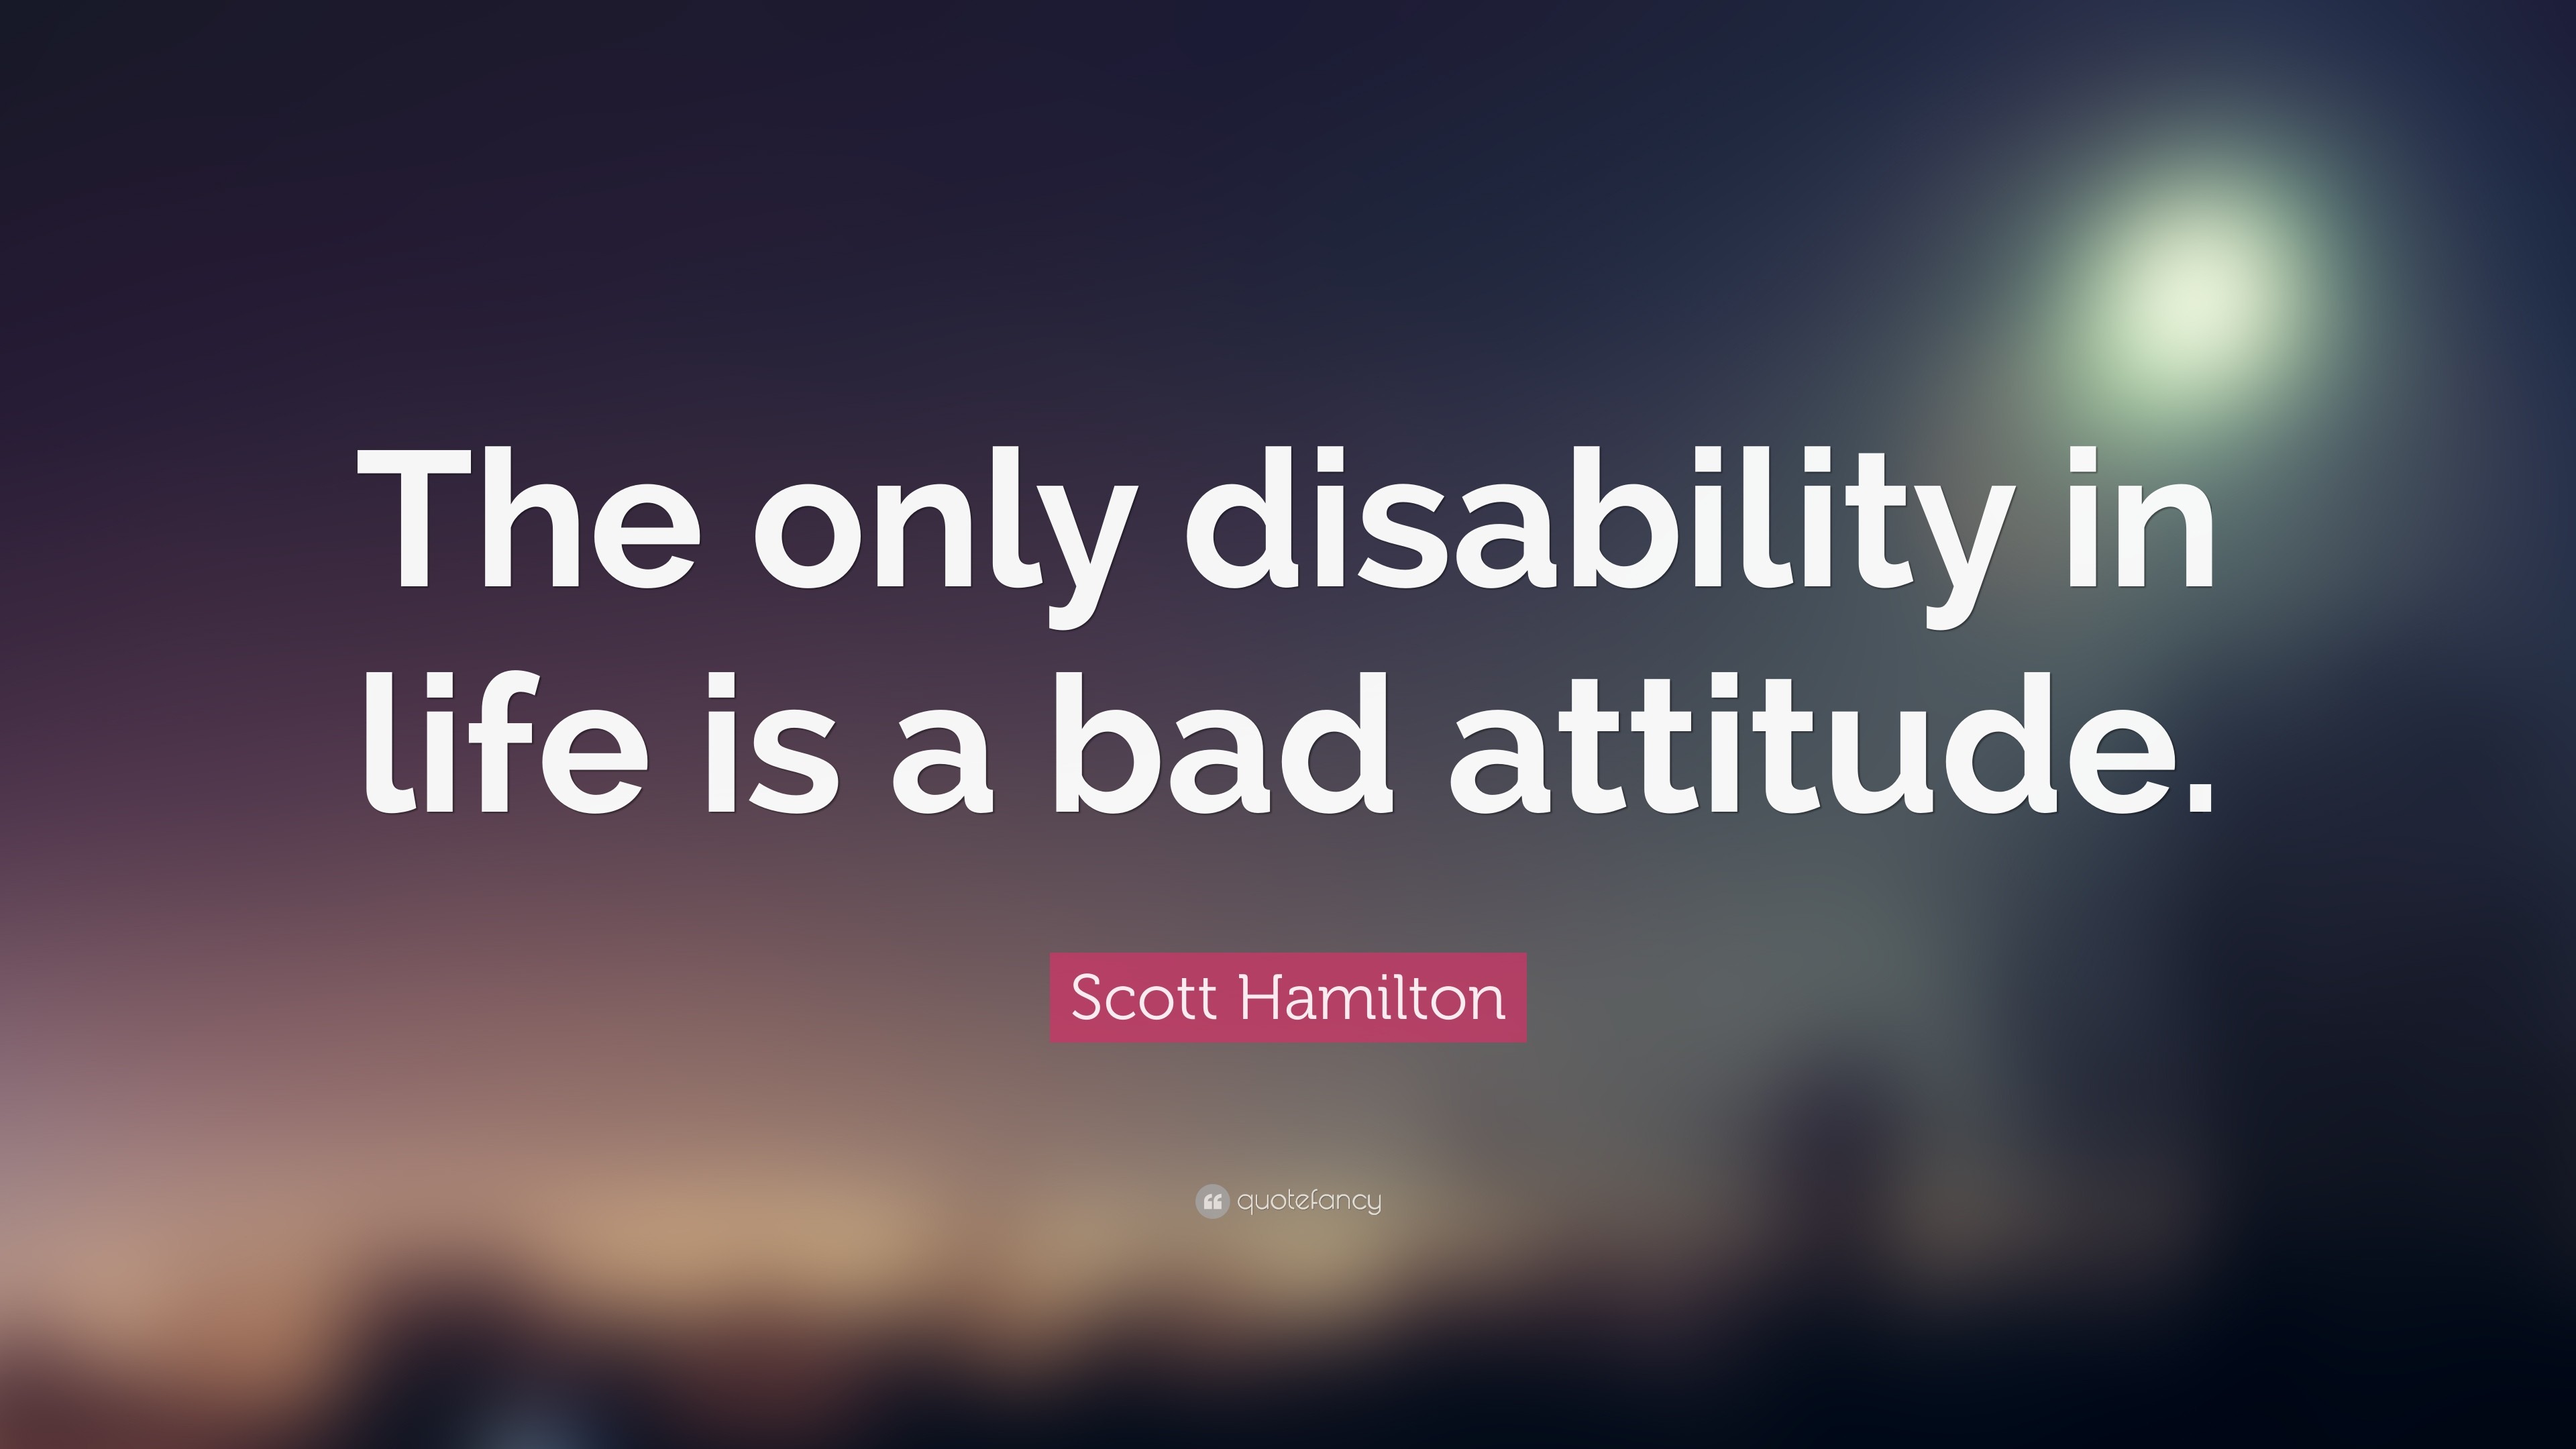 3840x2160 Attitude Quotes: “The only disability in life is a bad attitude.” —